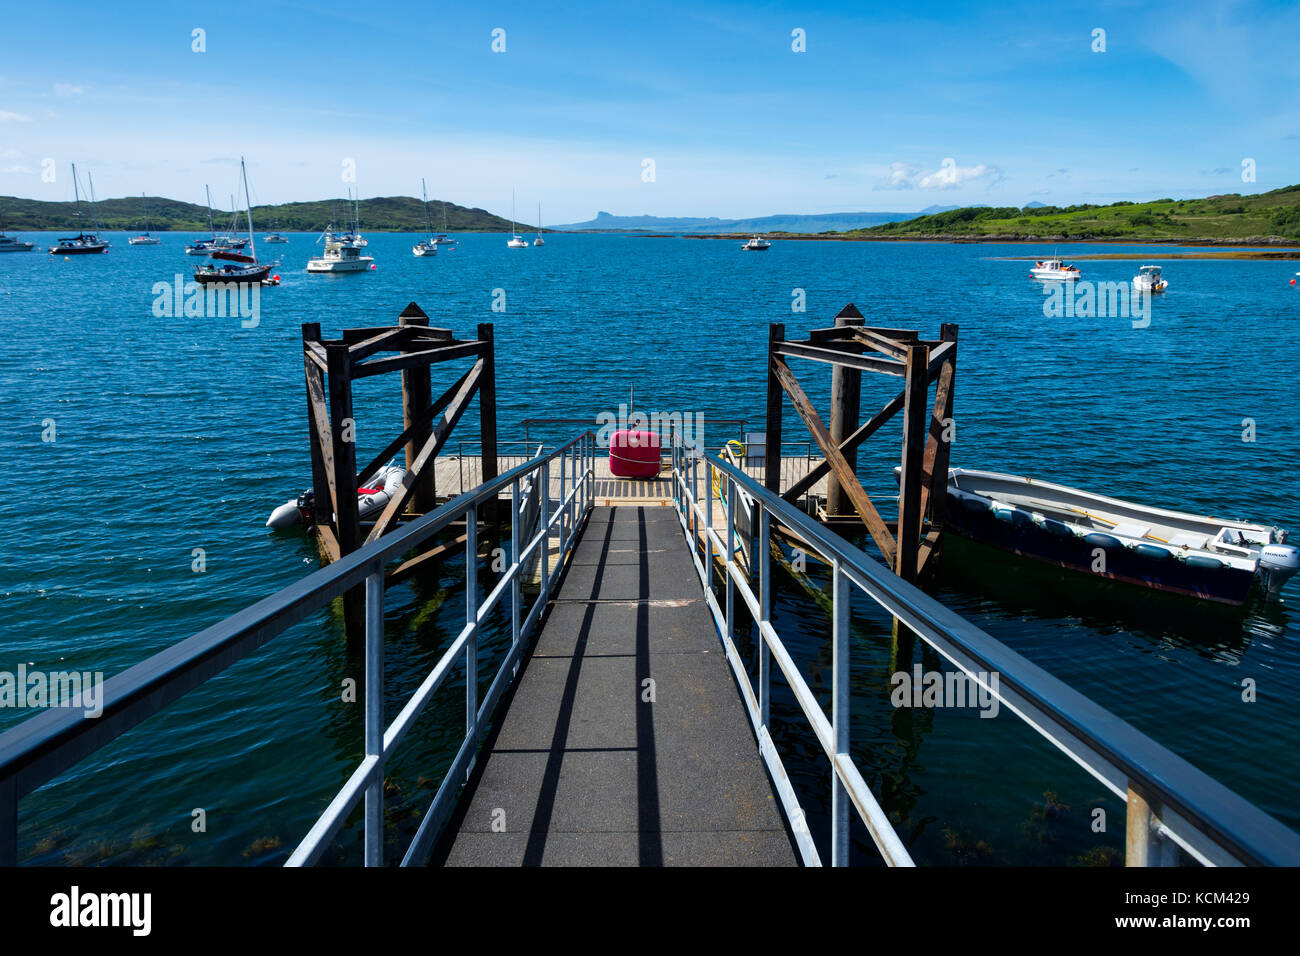 Floating jetty on the Loch nan Ceall sea loch at Arisaig harbour, Scotland, UK, with the Sgurr of Eigg on the Isle of Eigg in the distance. Stock Photo